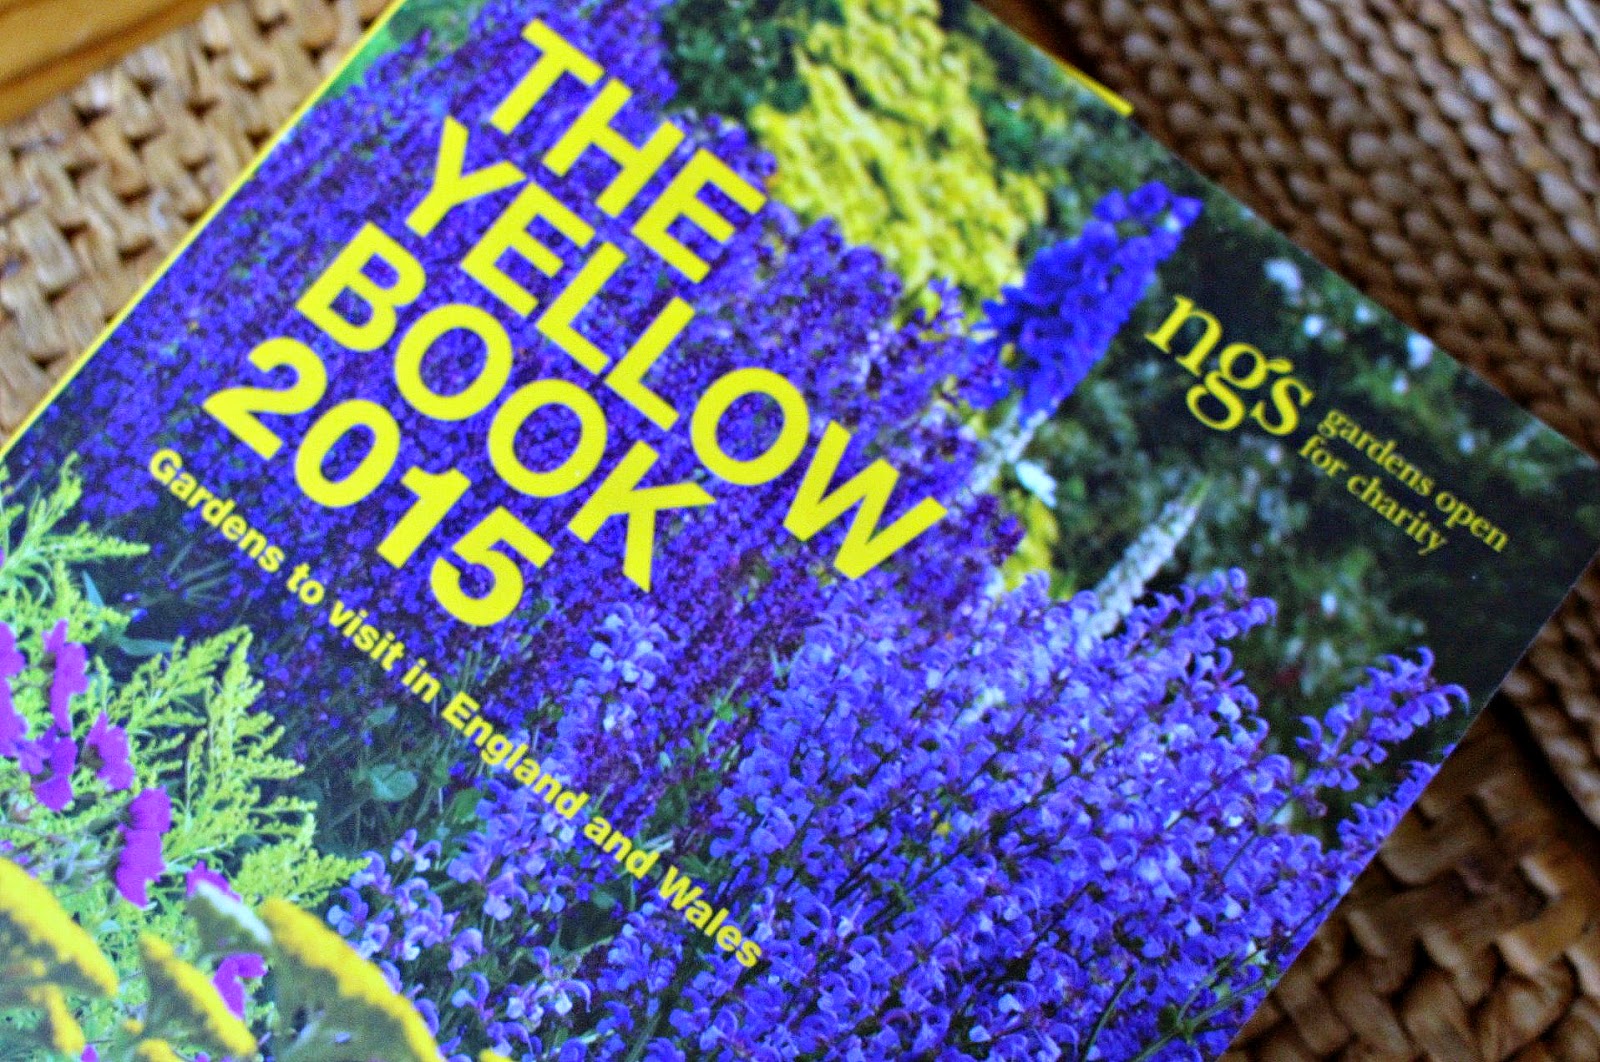 Photo of the Yellow Book which details all the gardens open for the NGS